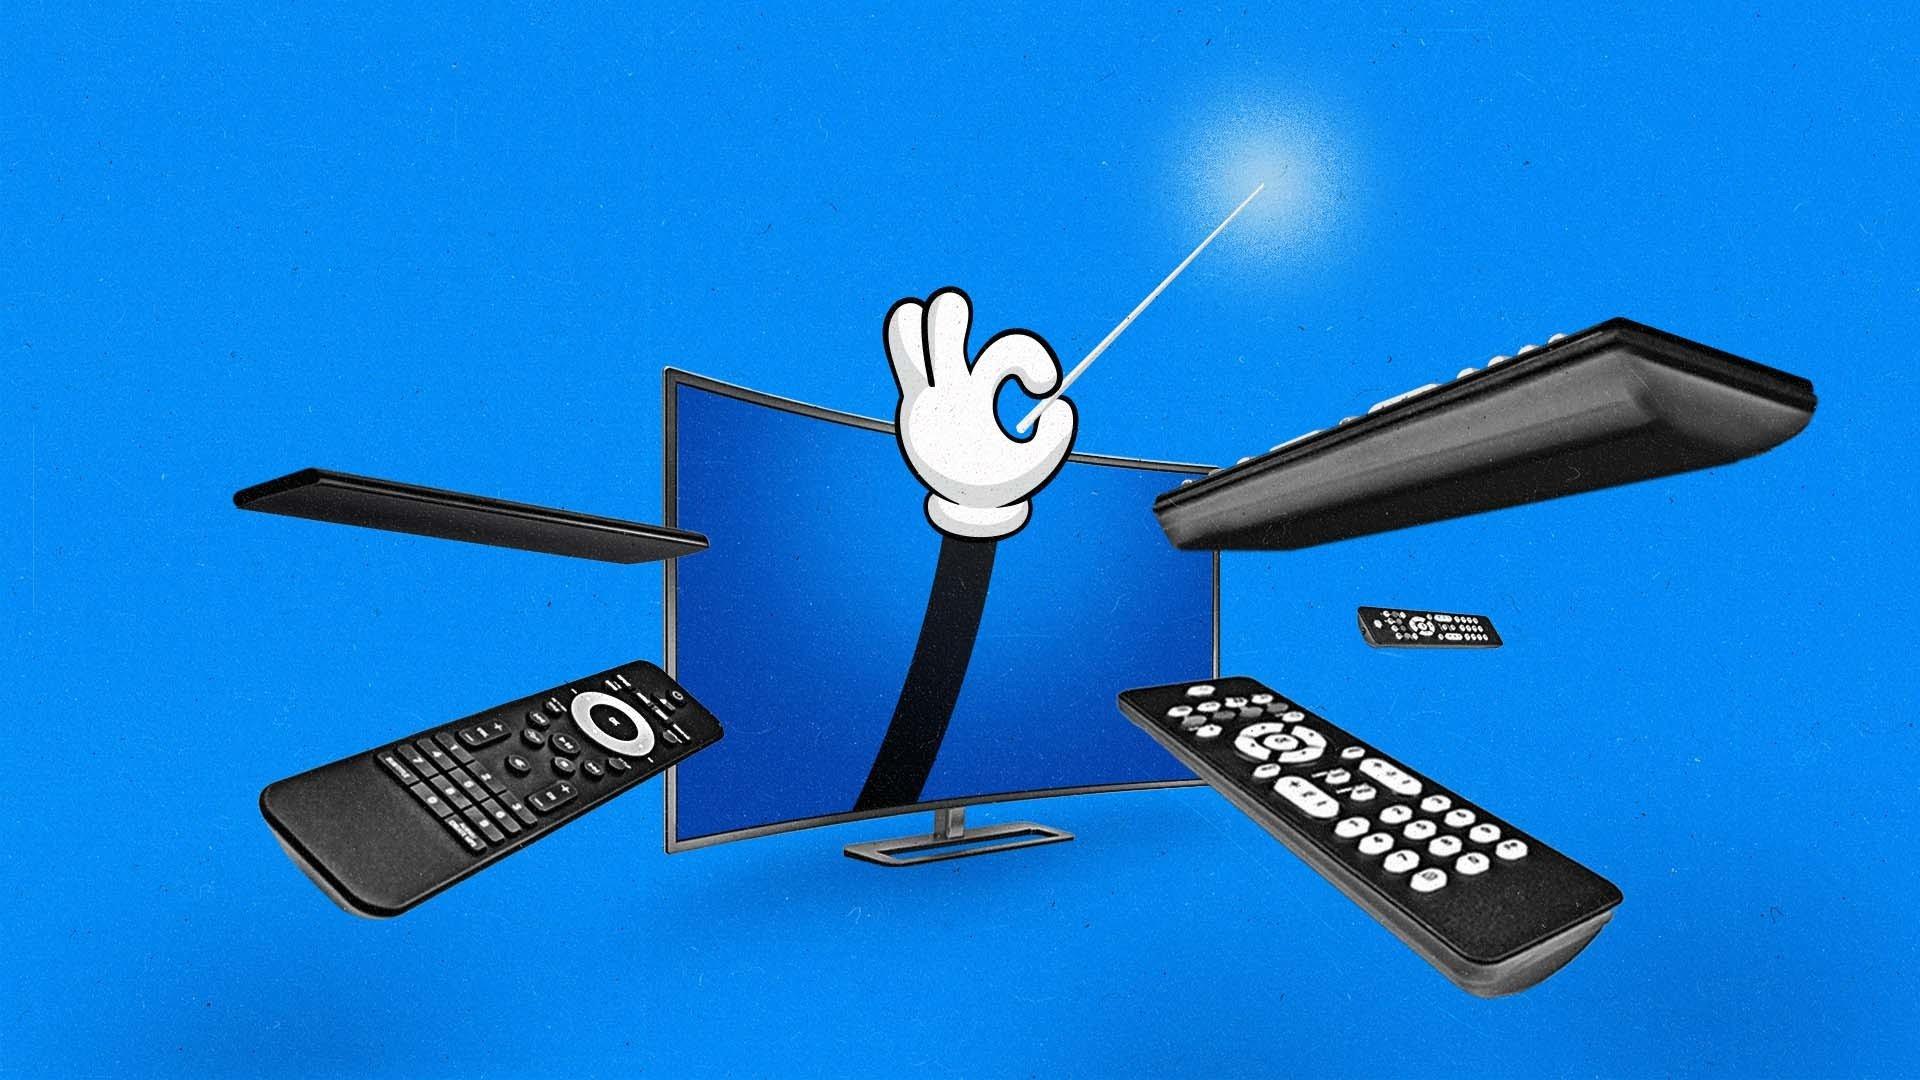 Mickey Mouse's hand coming out of a TV screen with remotes pointing at the TV